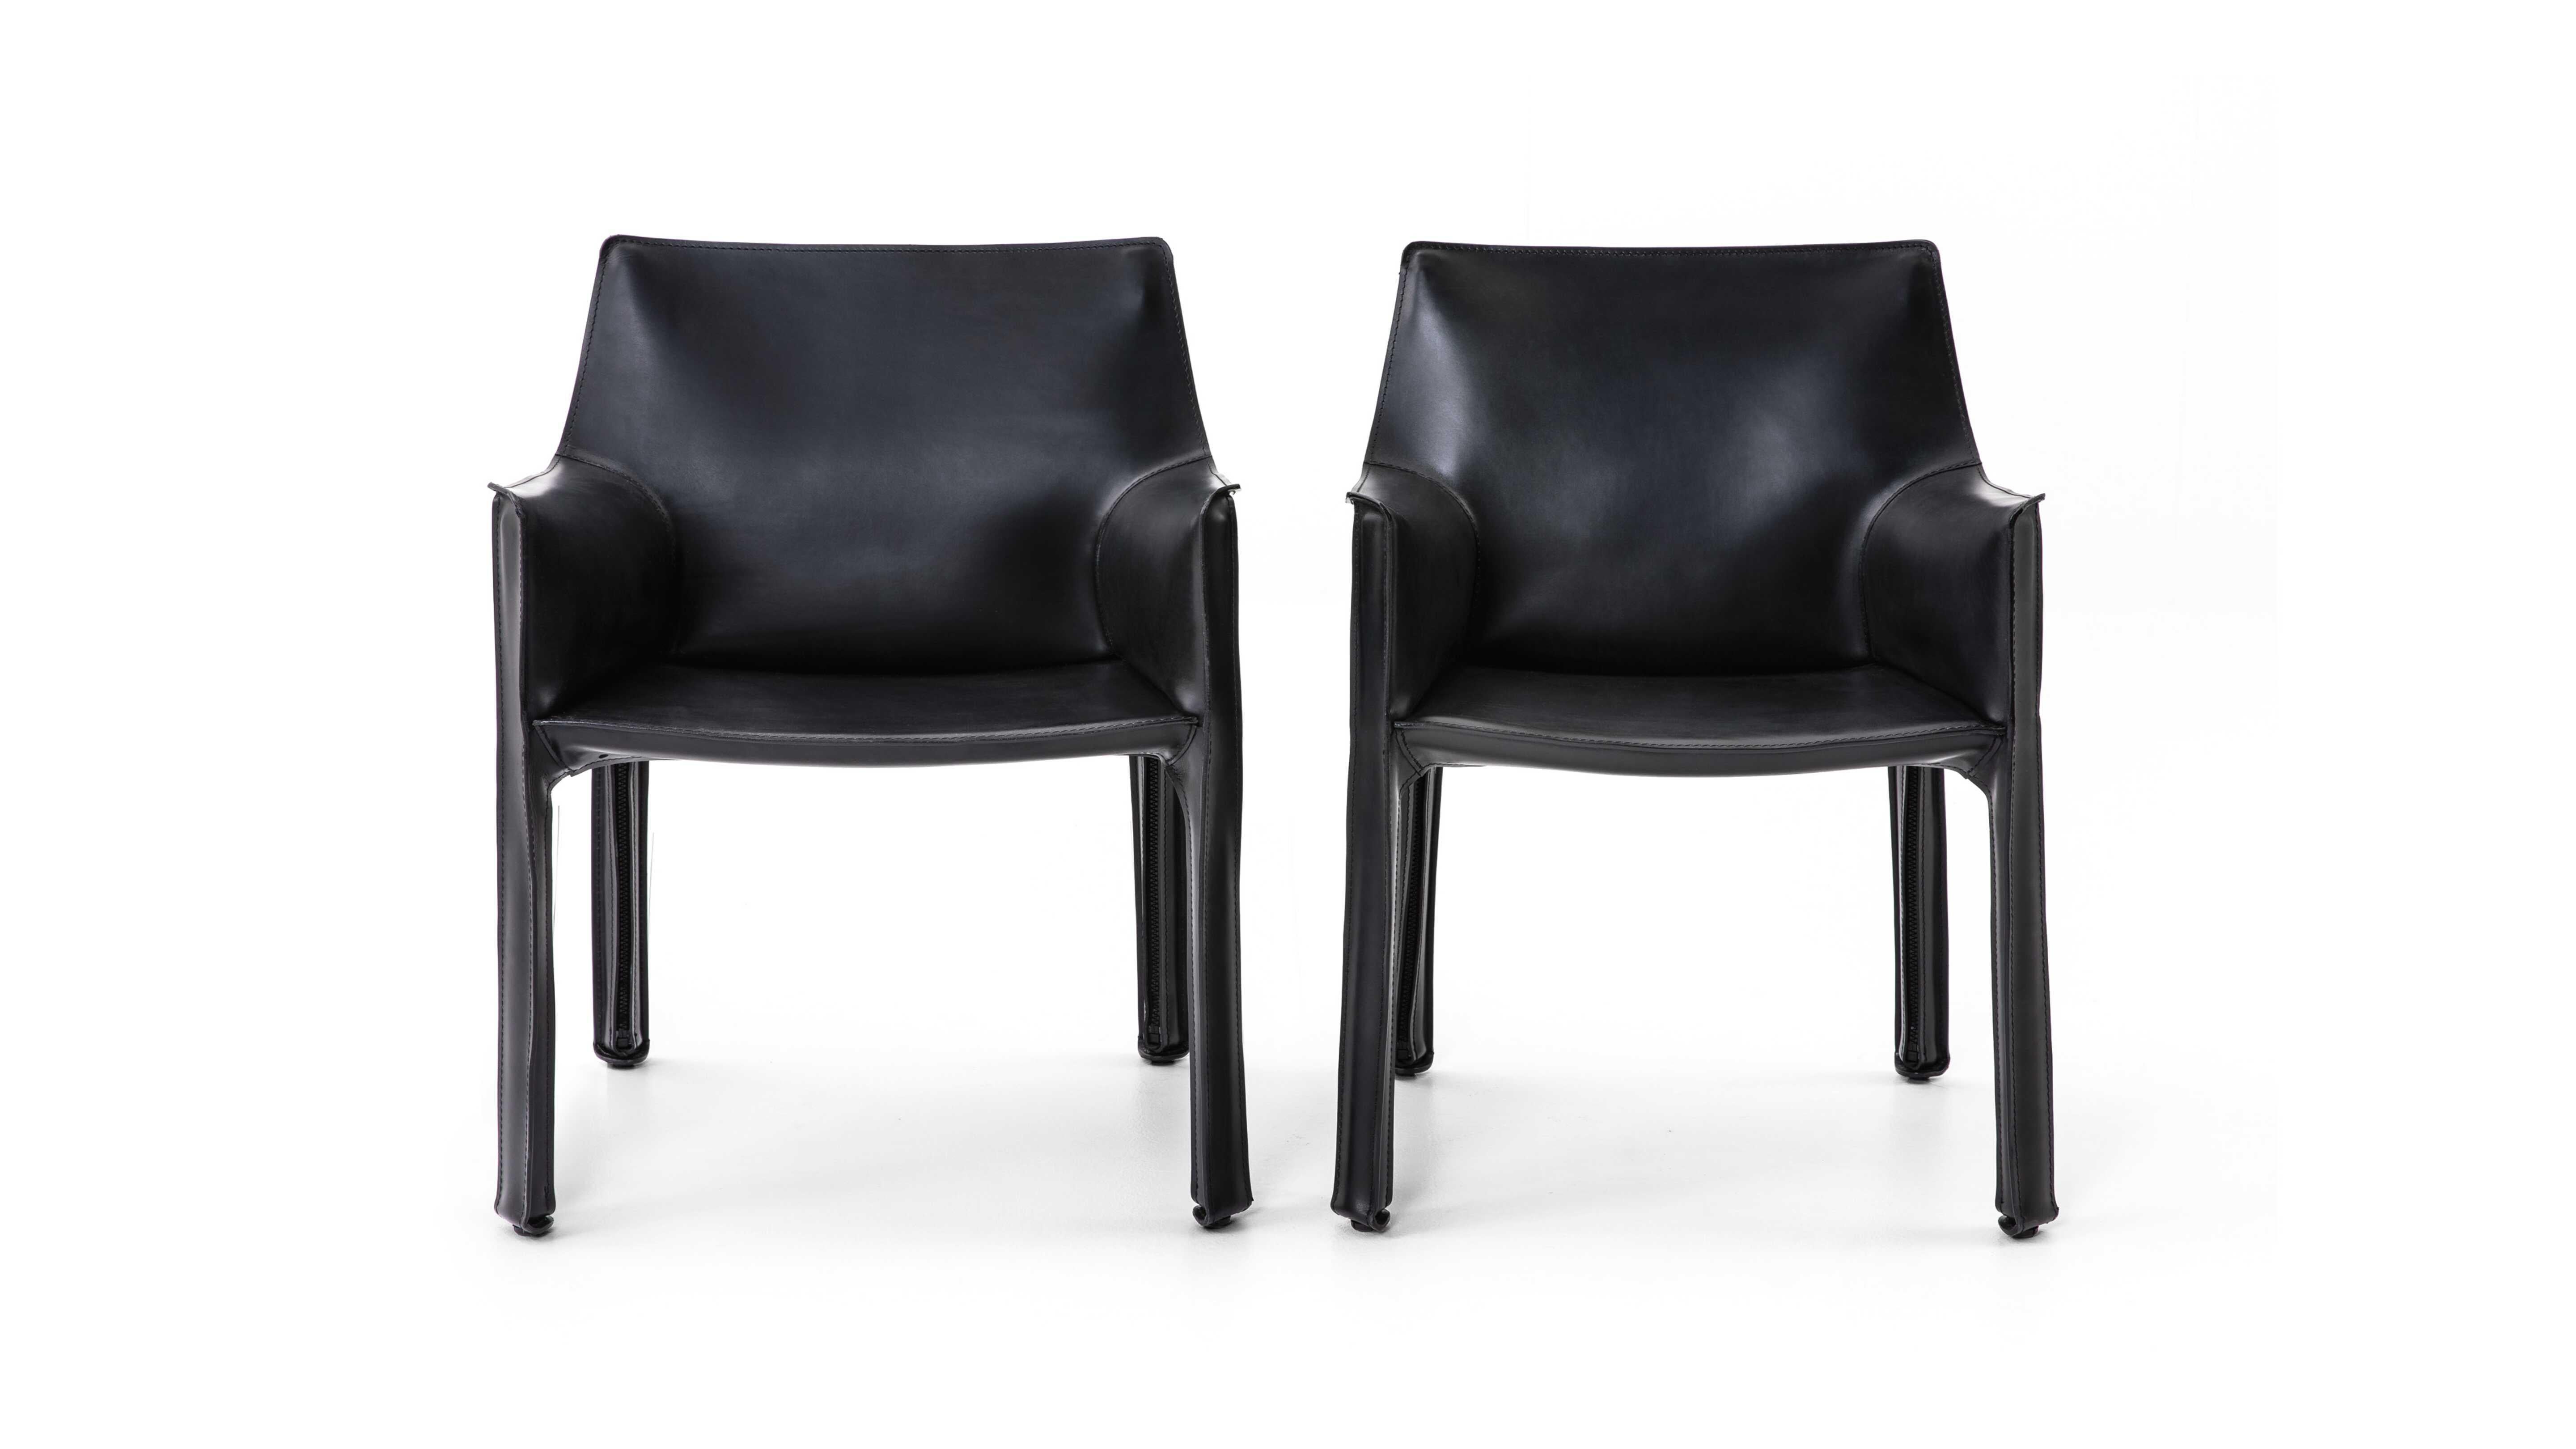 Prices are dependent on the chosen size and color. Also available in 66cm width, 57cm depth, 82cm height and 45cm seat height. 

Cab is the world’s first free-standing cowhide chair, informed by the relationship between the human skeleton and the